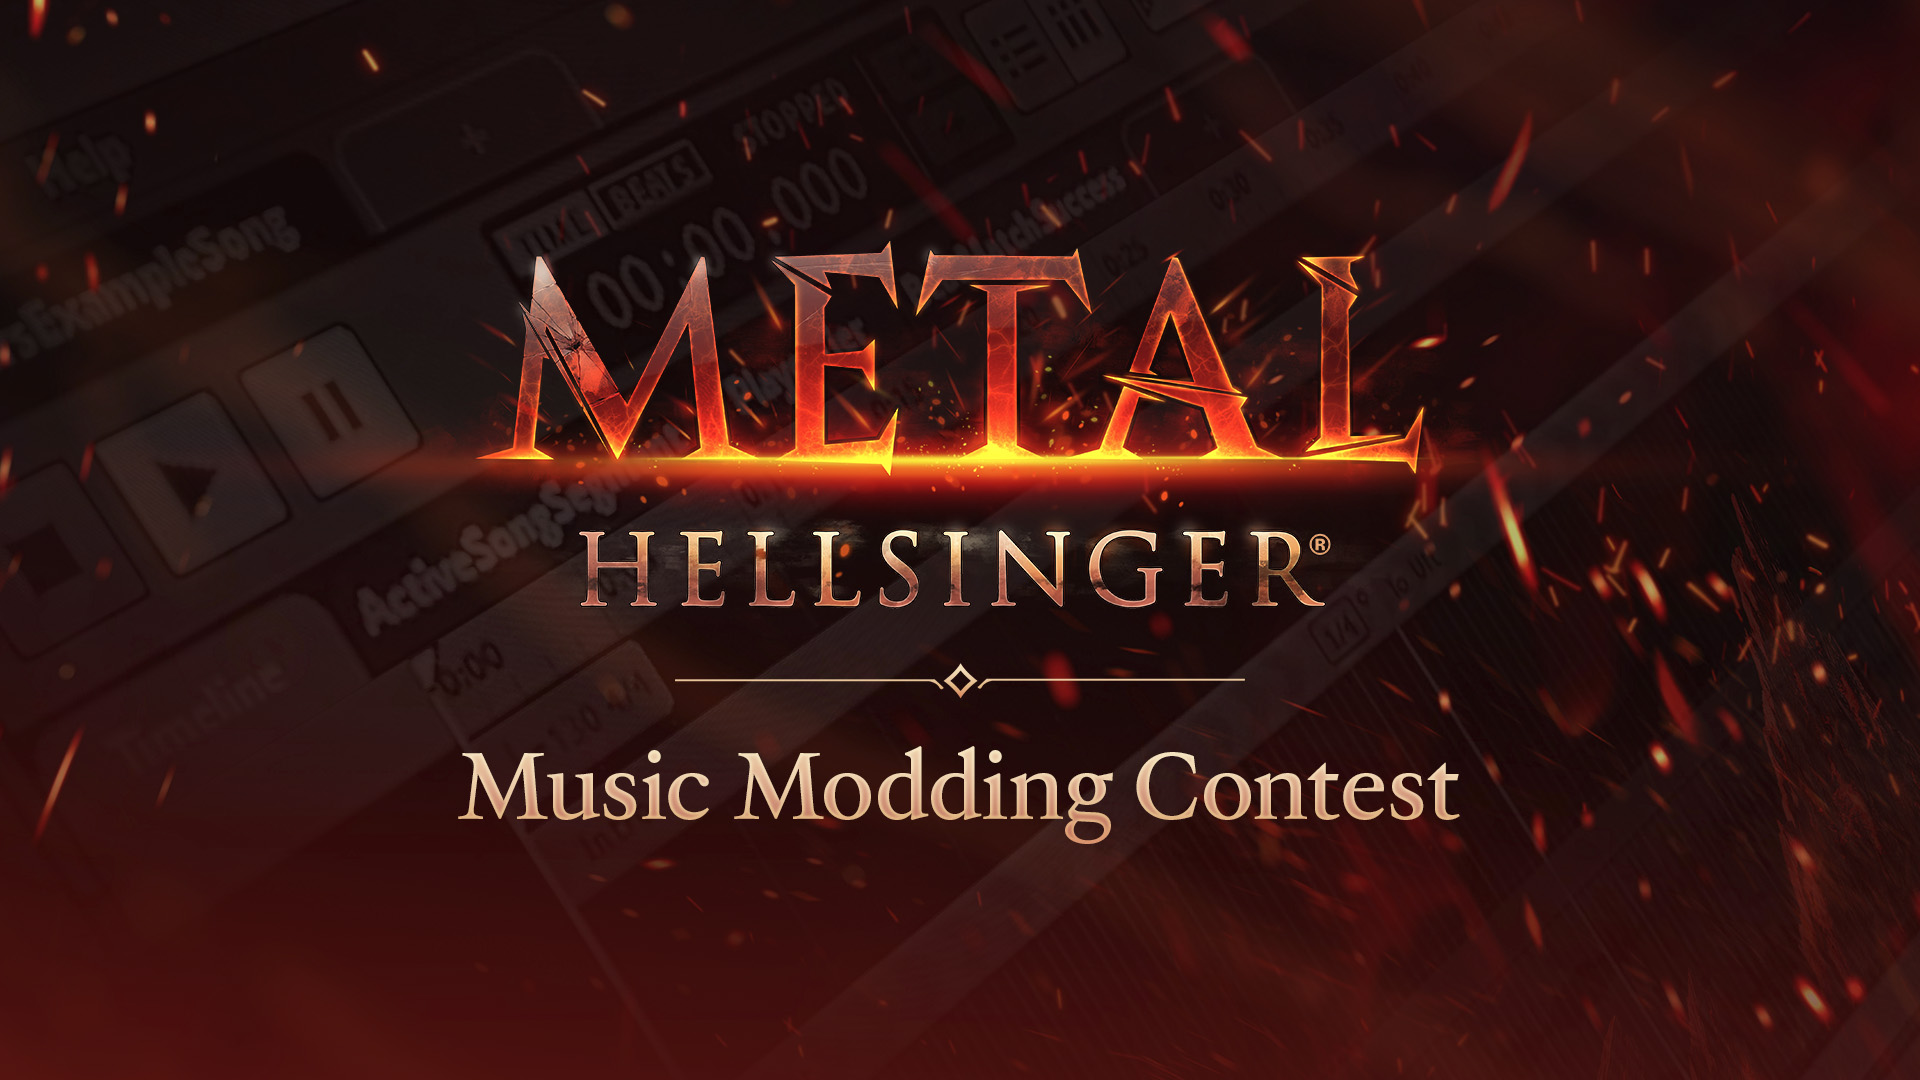 Metal: Hellsinger modding tools let you add your own music - Polygon